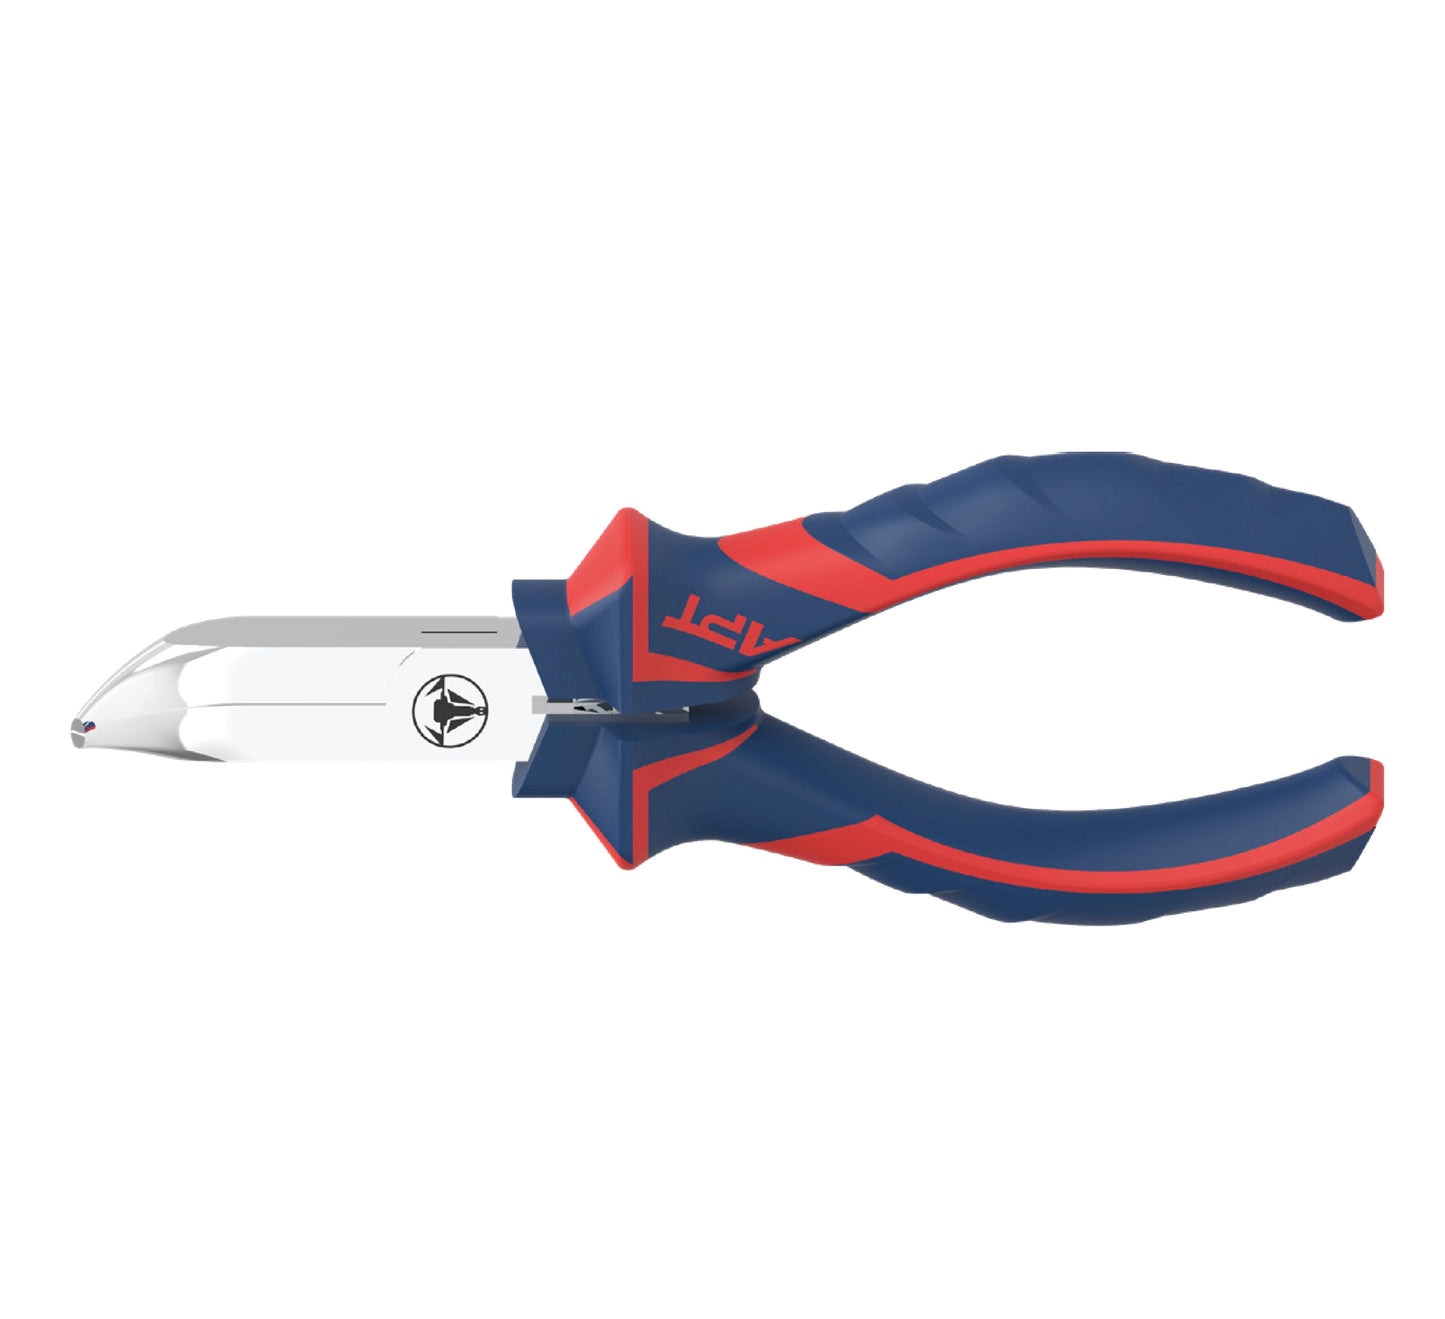 APT MINI LONG BENT NOSE PLIER 4.5" NEW APT 2 COLOR HANDLE-NEW APT PP CARD WITH RED STRAP-AH1437544-115E